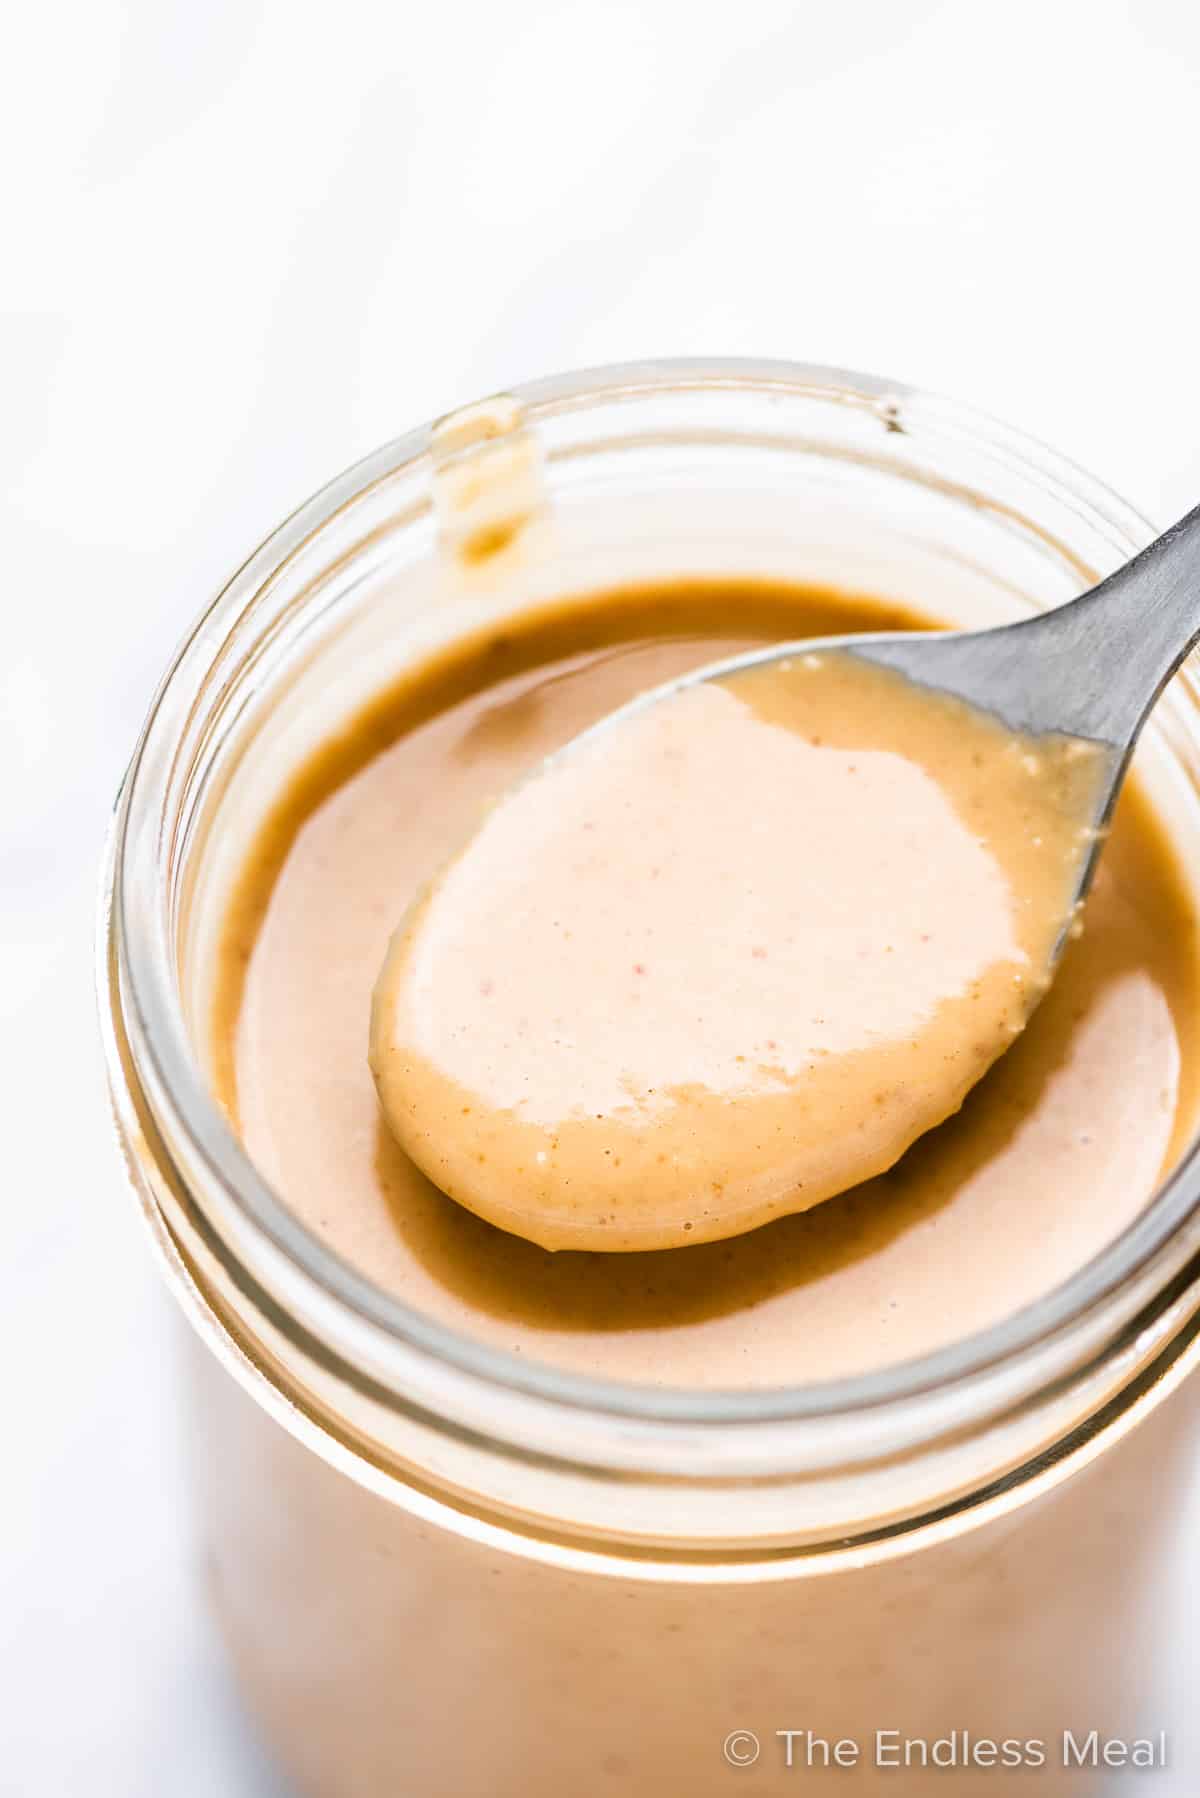 A spoon taking some peanut dressing out of a glass jar.